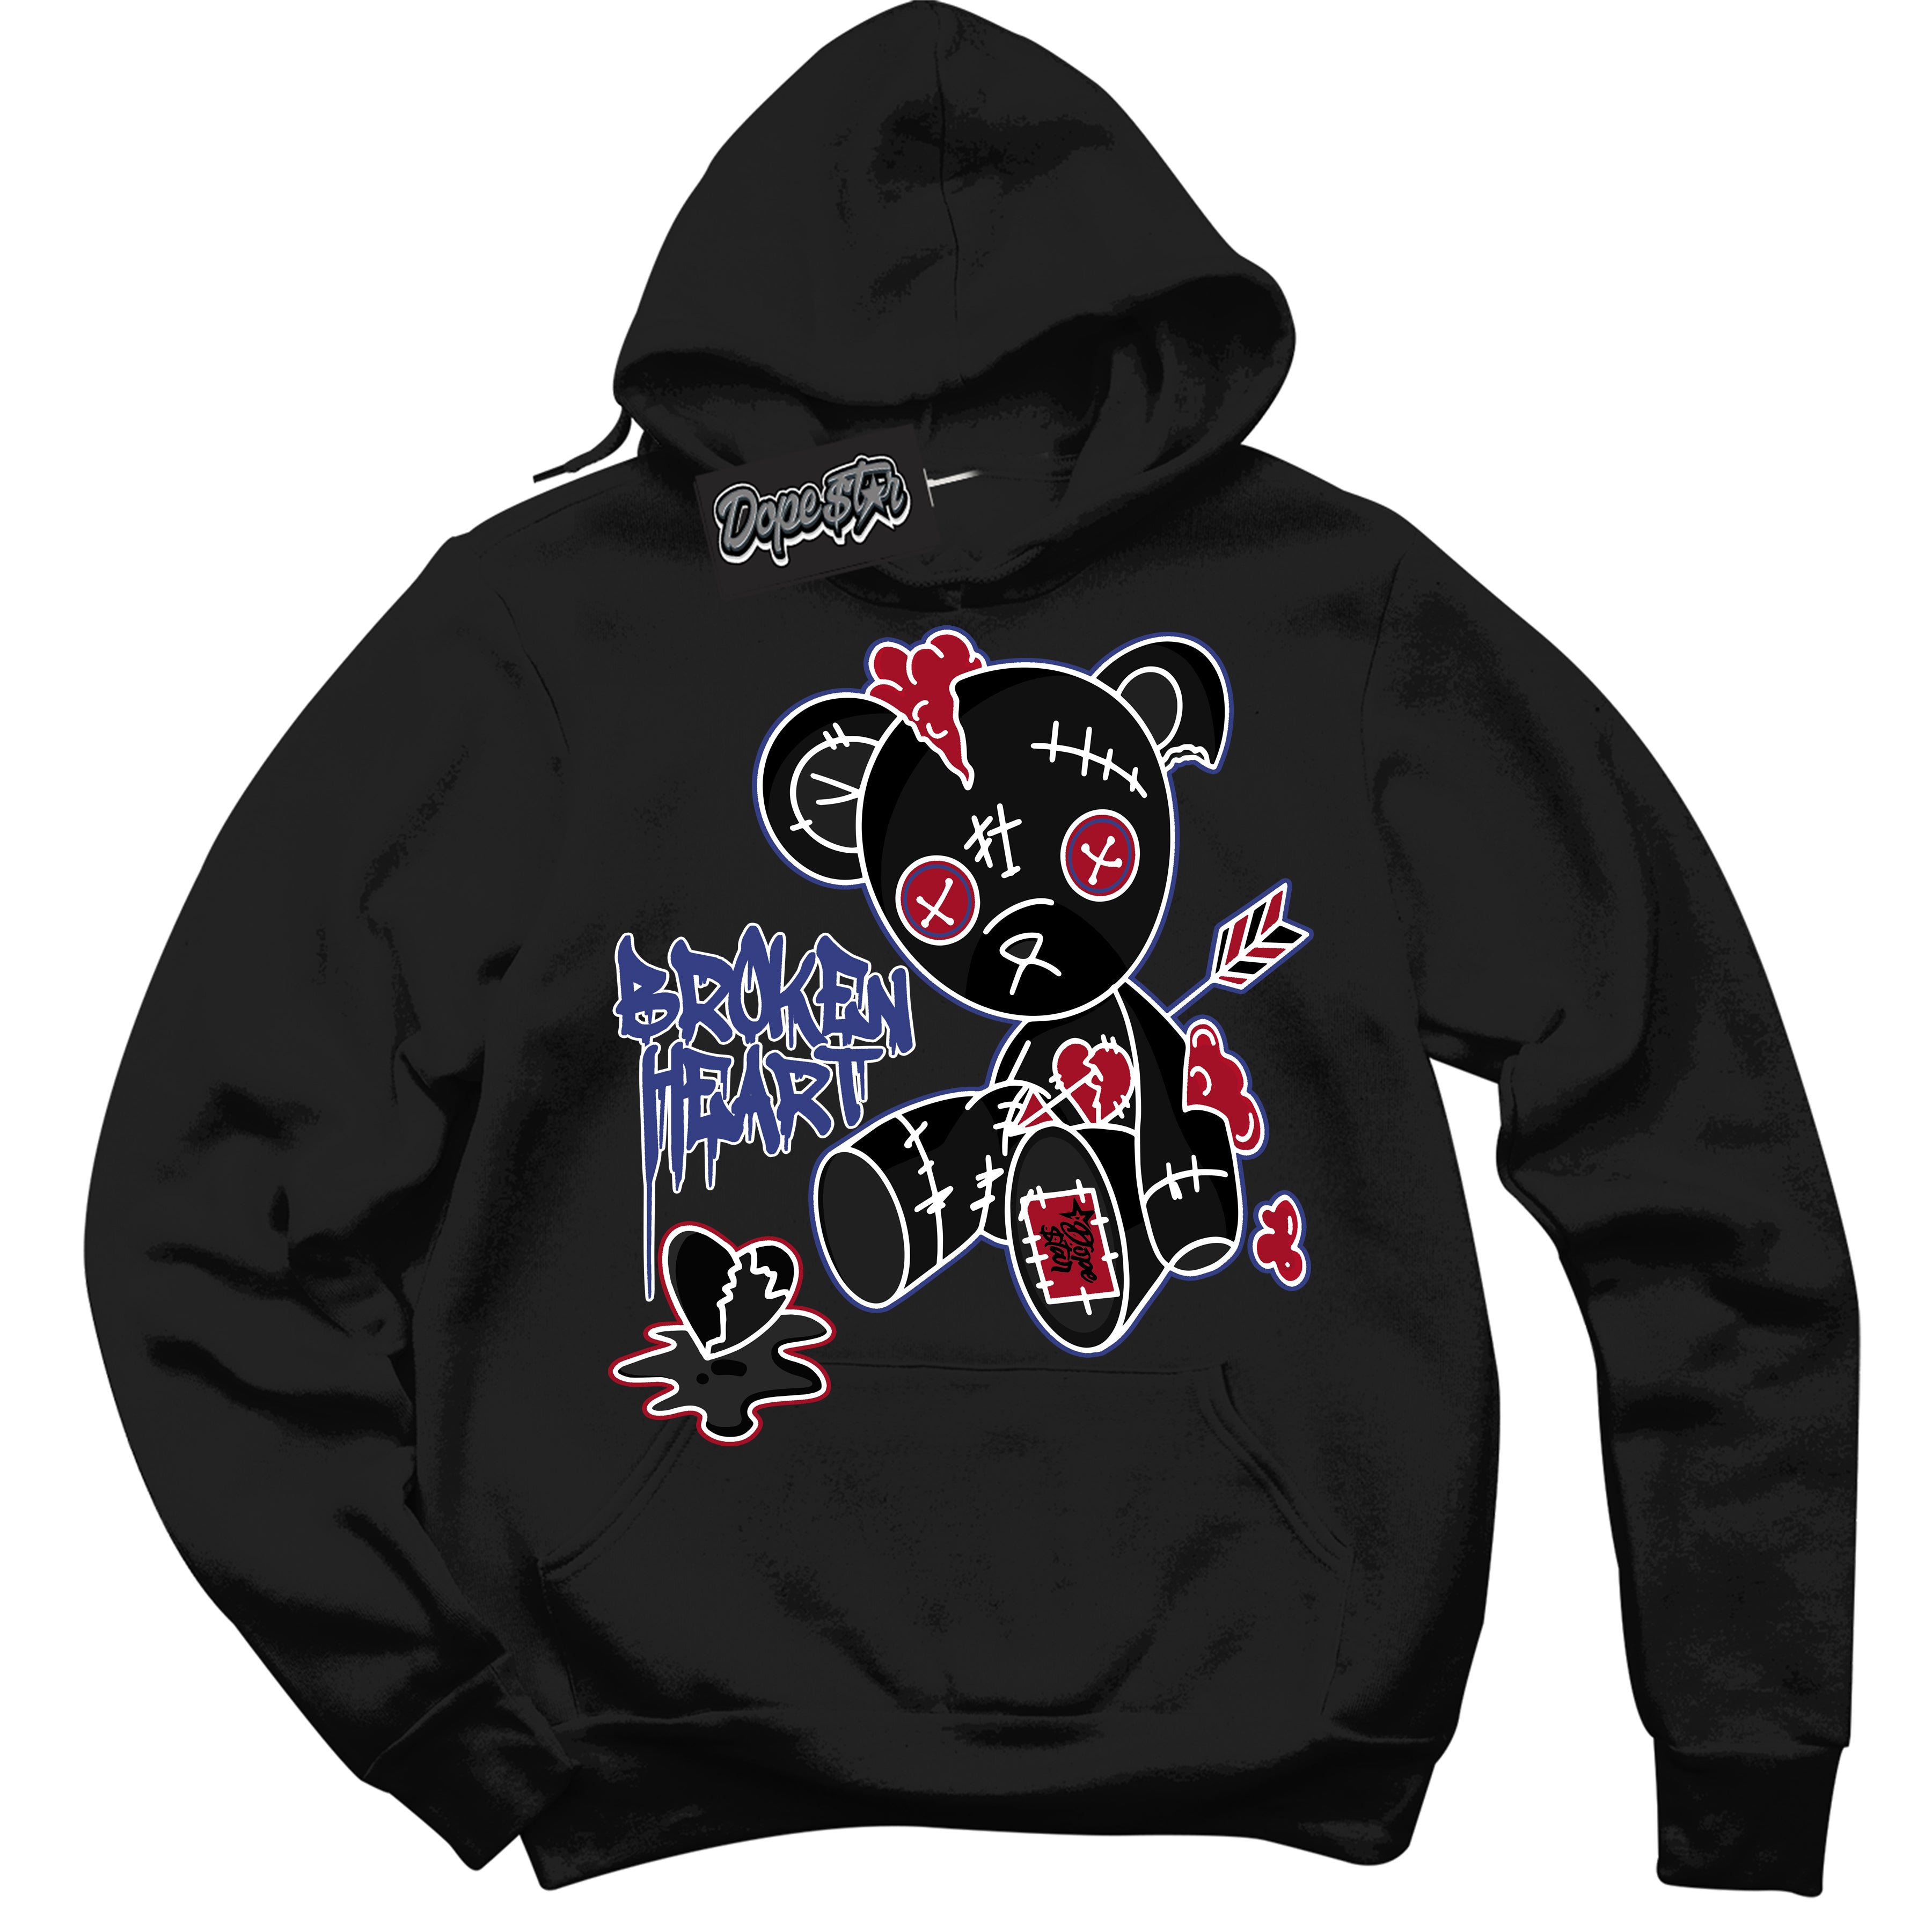 Cool Black Hoodie with “ Broken Heart Bear ”  design that Perfectly Matches Playoffs 8s Sneakers.